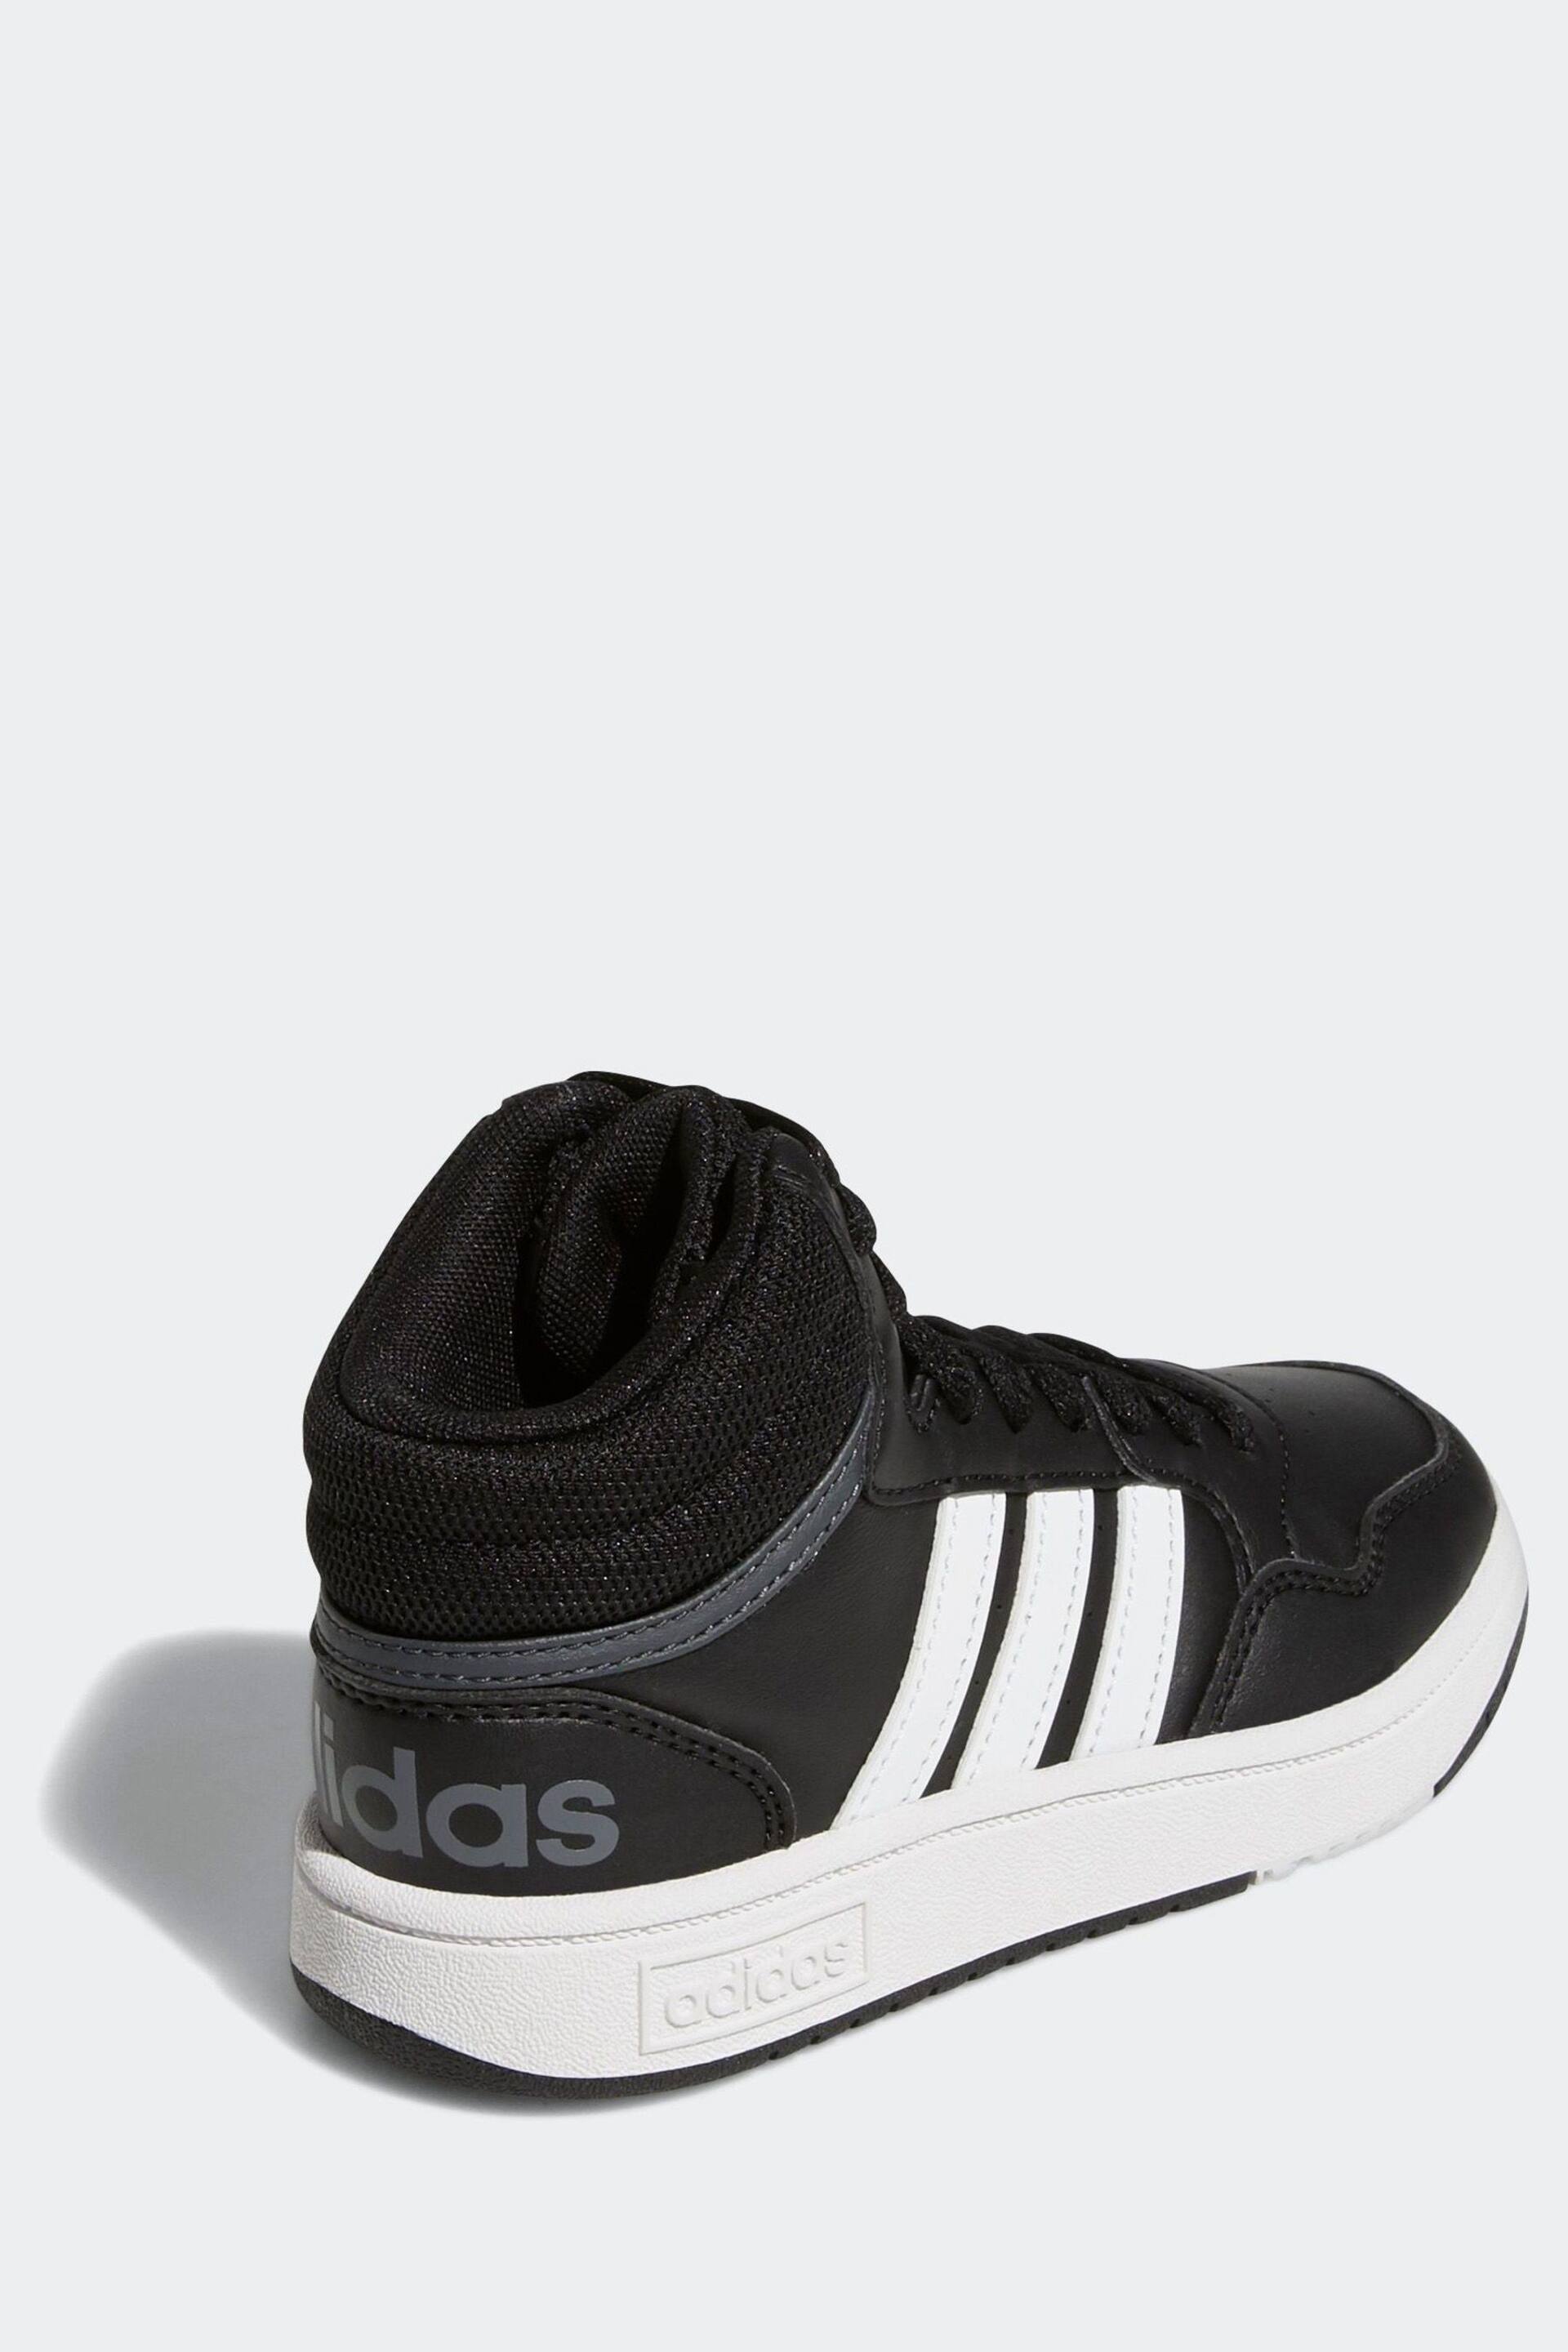 adidas Black/white Hoops Mid Shoes - Image 4 of 9